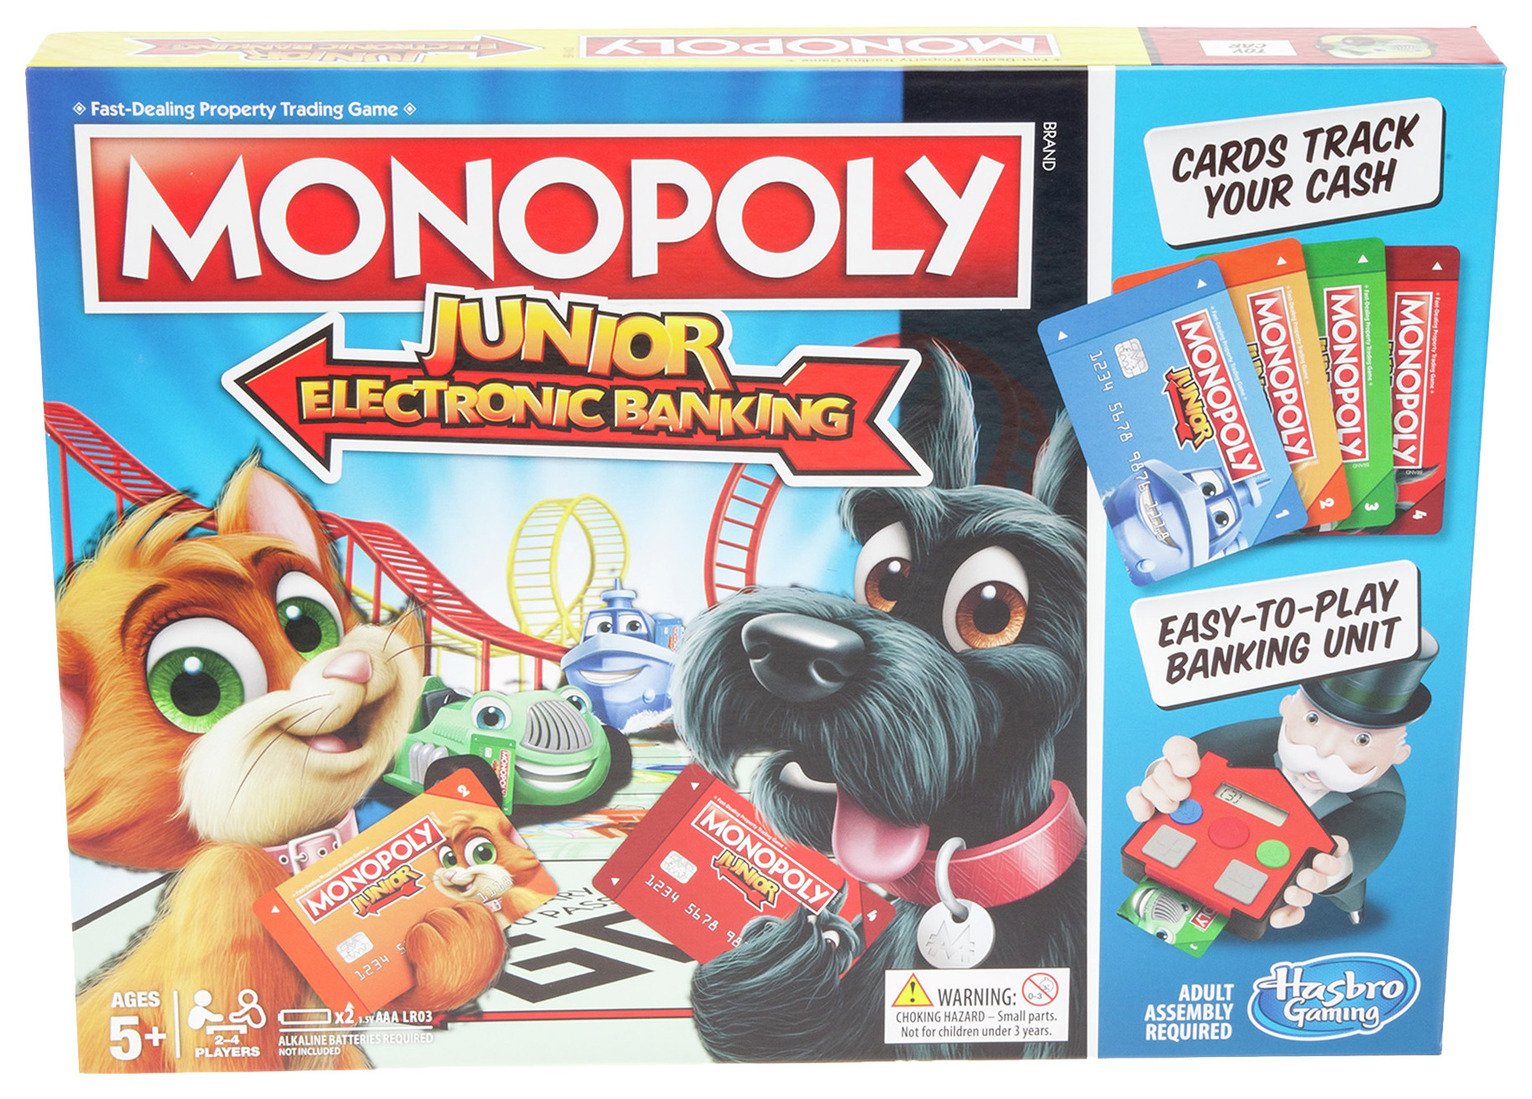 Monopoly Junior Electronic Banking from Hasbro Gaming